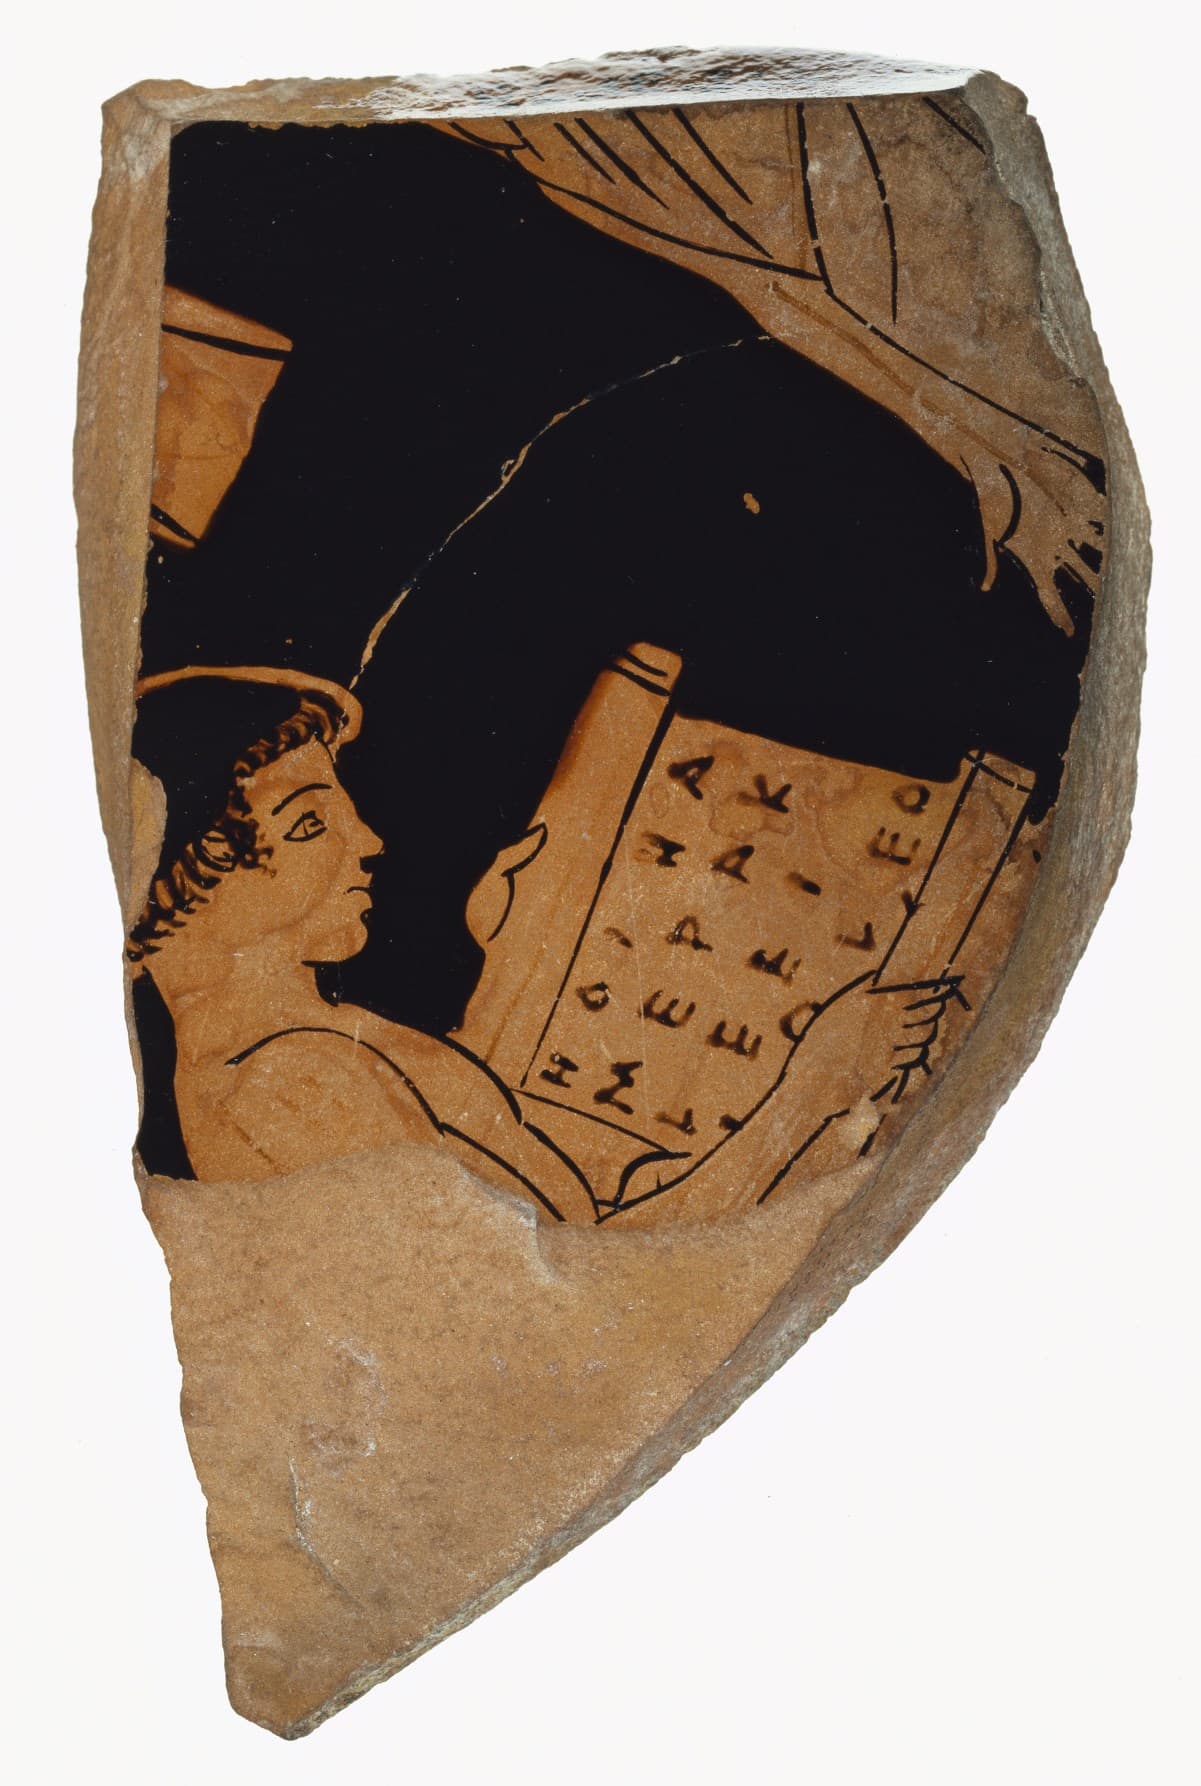 Attic Red-Figure Cup Fragment. (Digital image courtesy of the Getty's Open Content Program.)